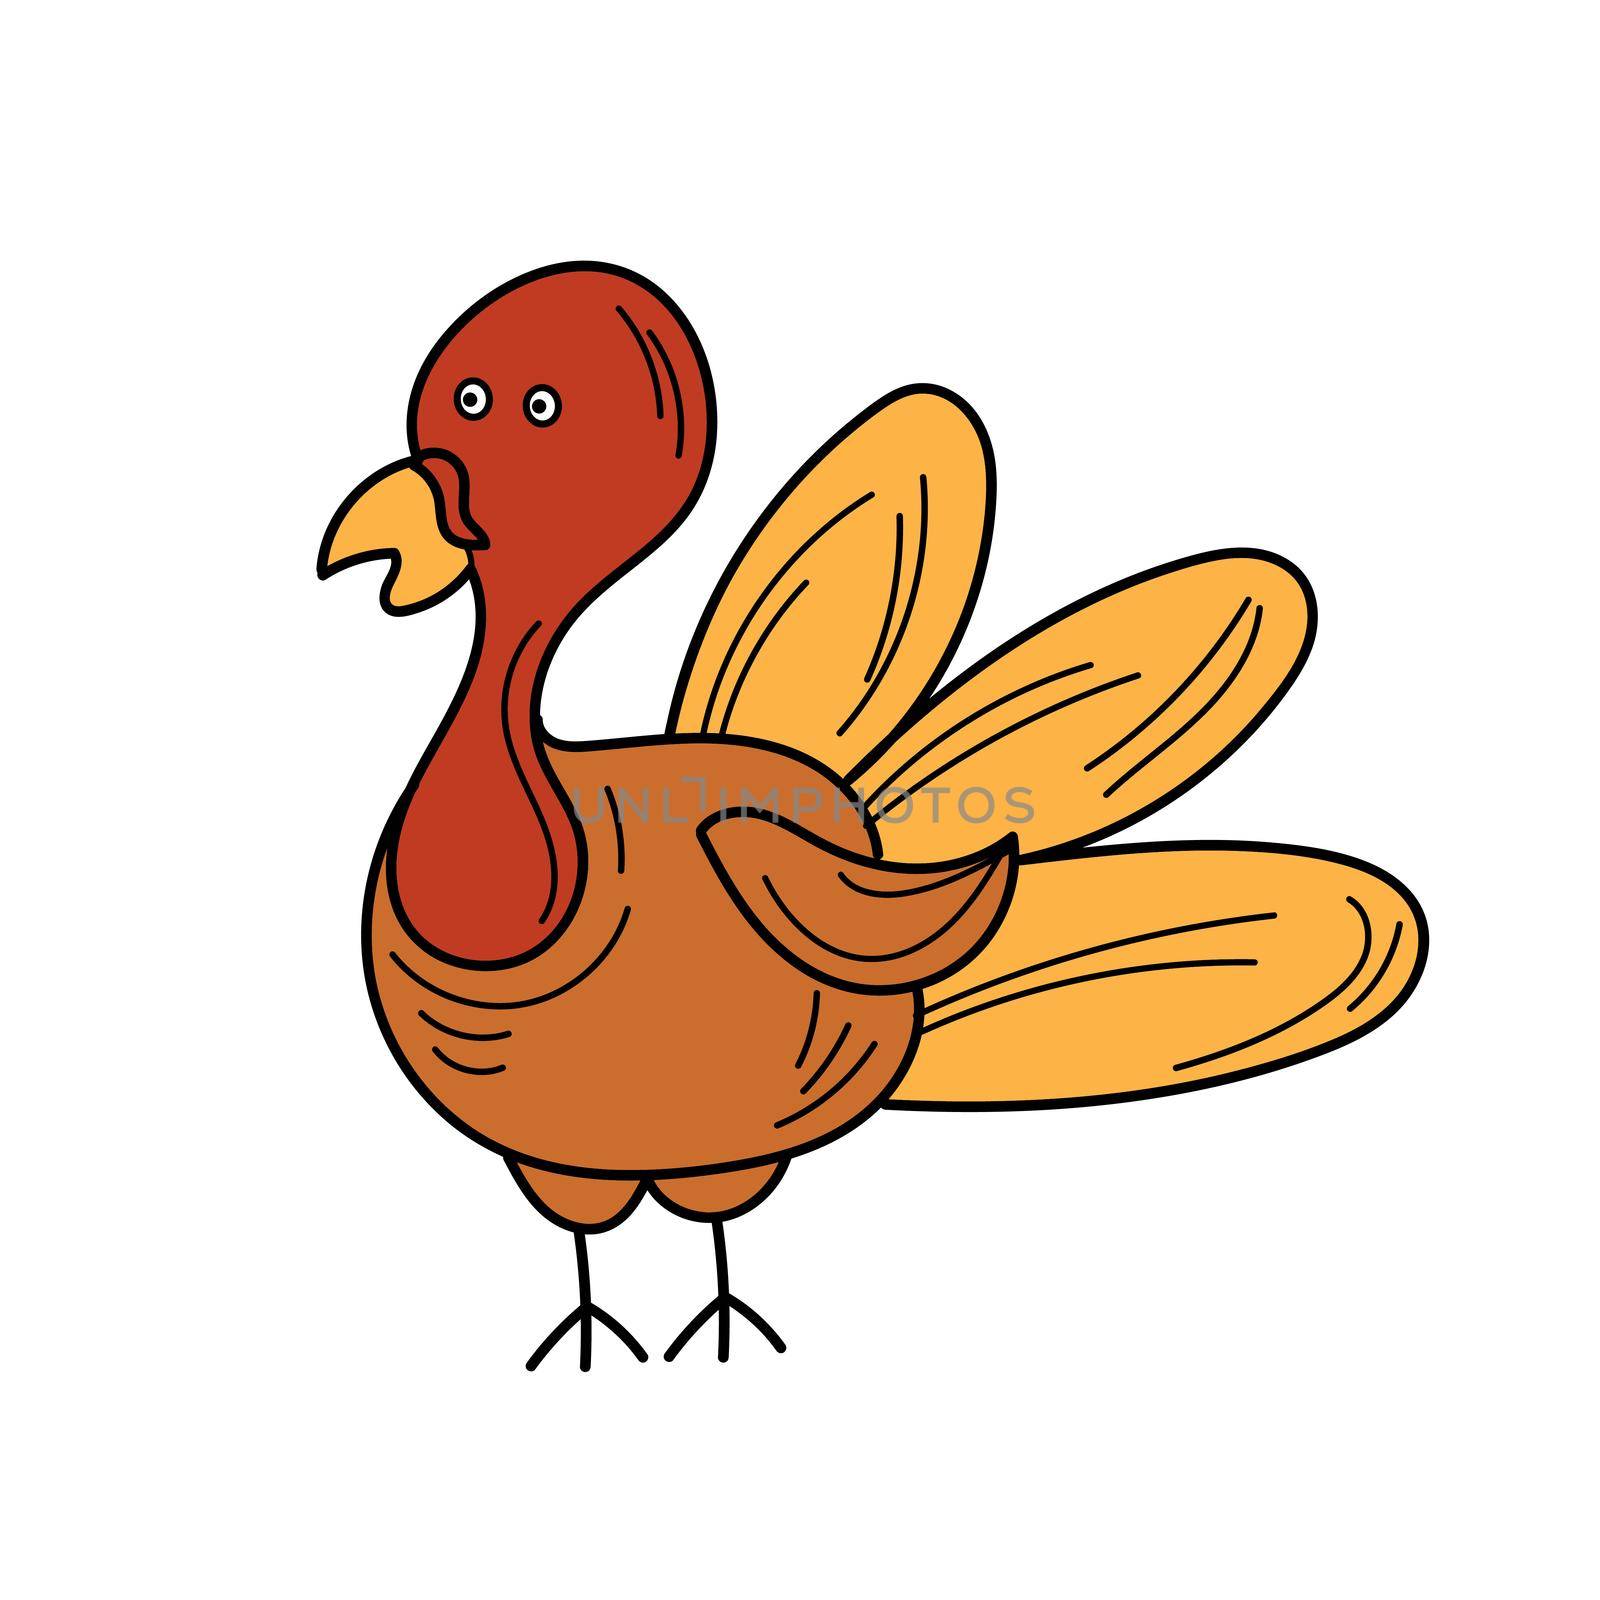 Hand drawn doodle cute Turkey icon. Vector illustration isolated autumn holiday symbol collection. Cartoon celebration element